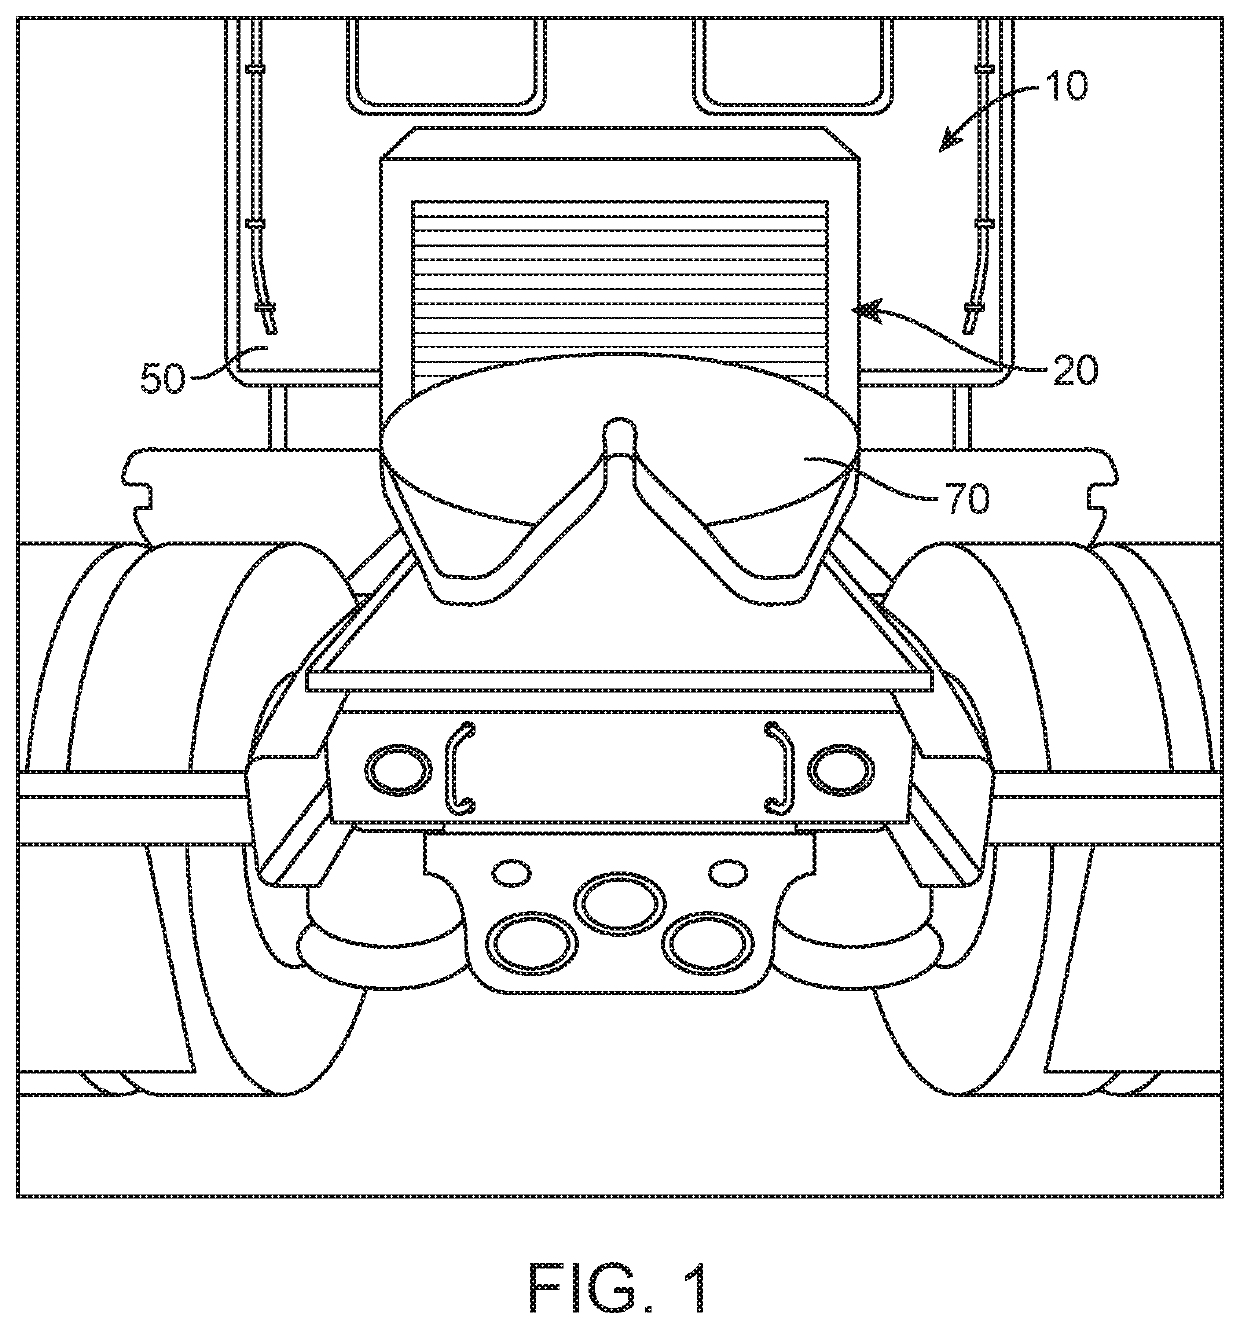 Fifth-wheel receiver cover